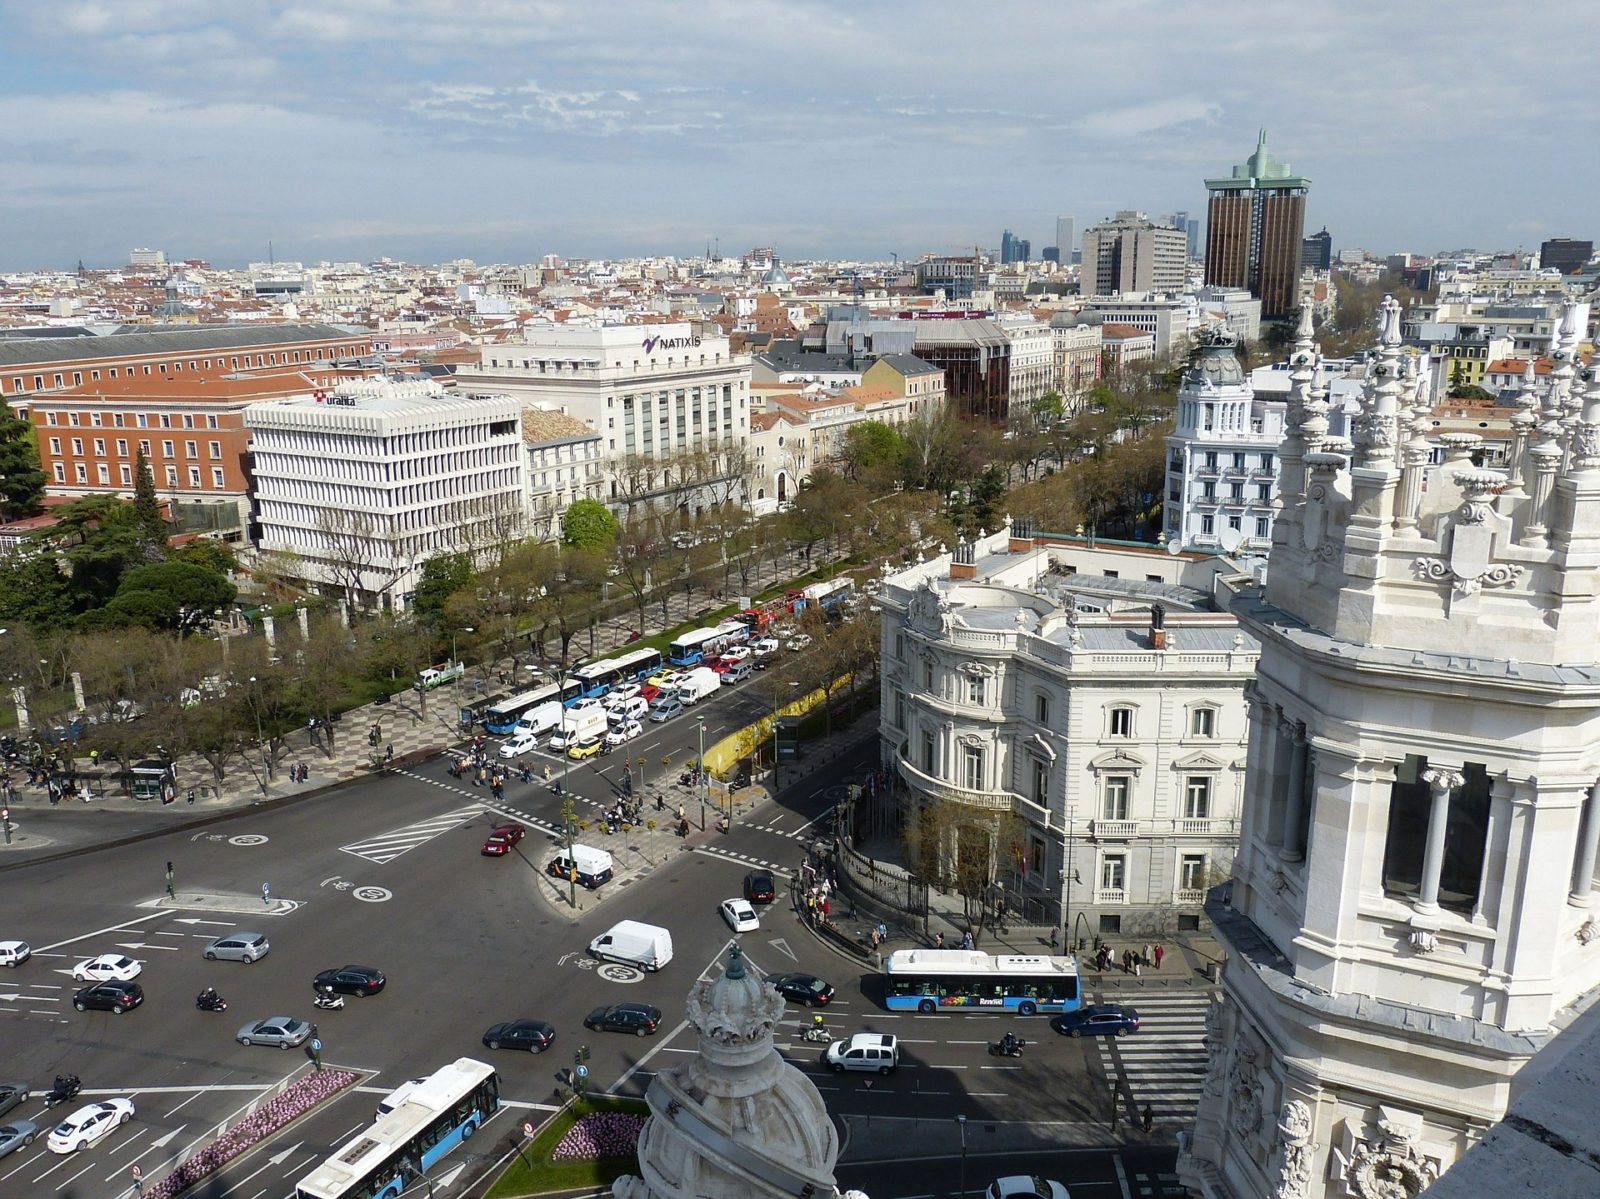 Top 10 Places To Visit And Things To Do in Madrid, Spain